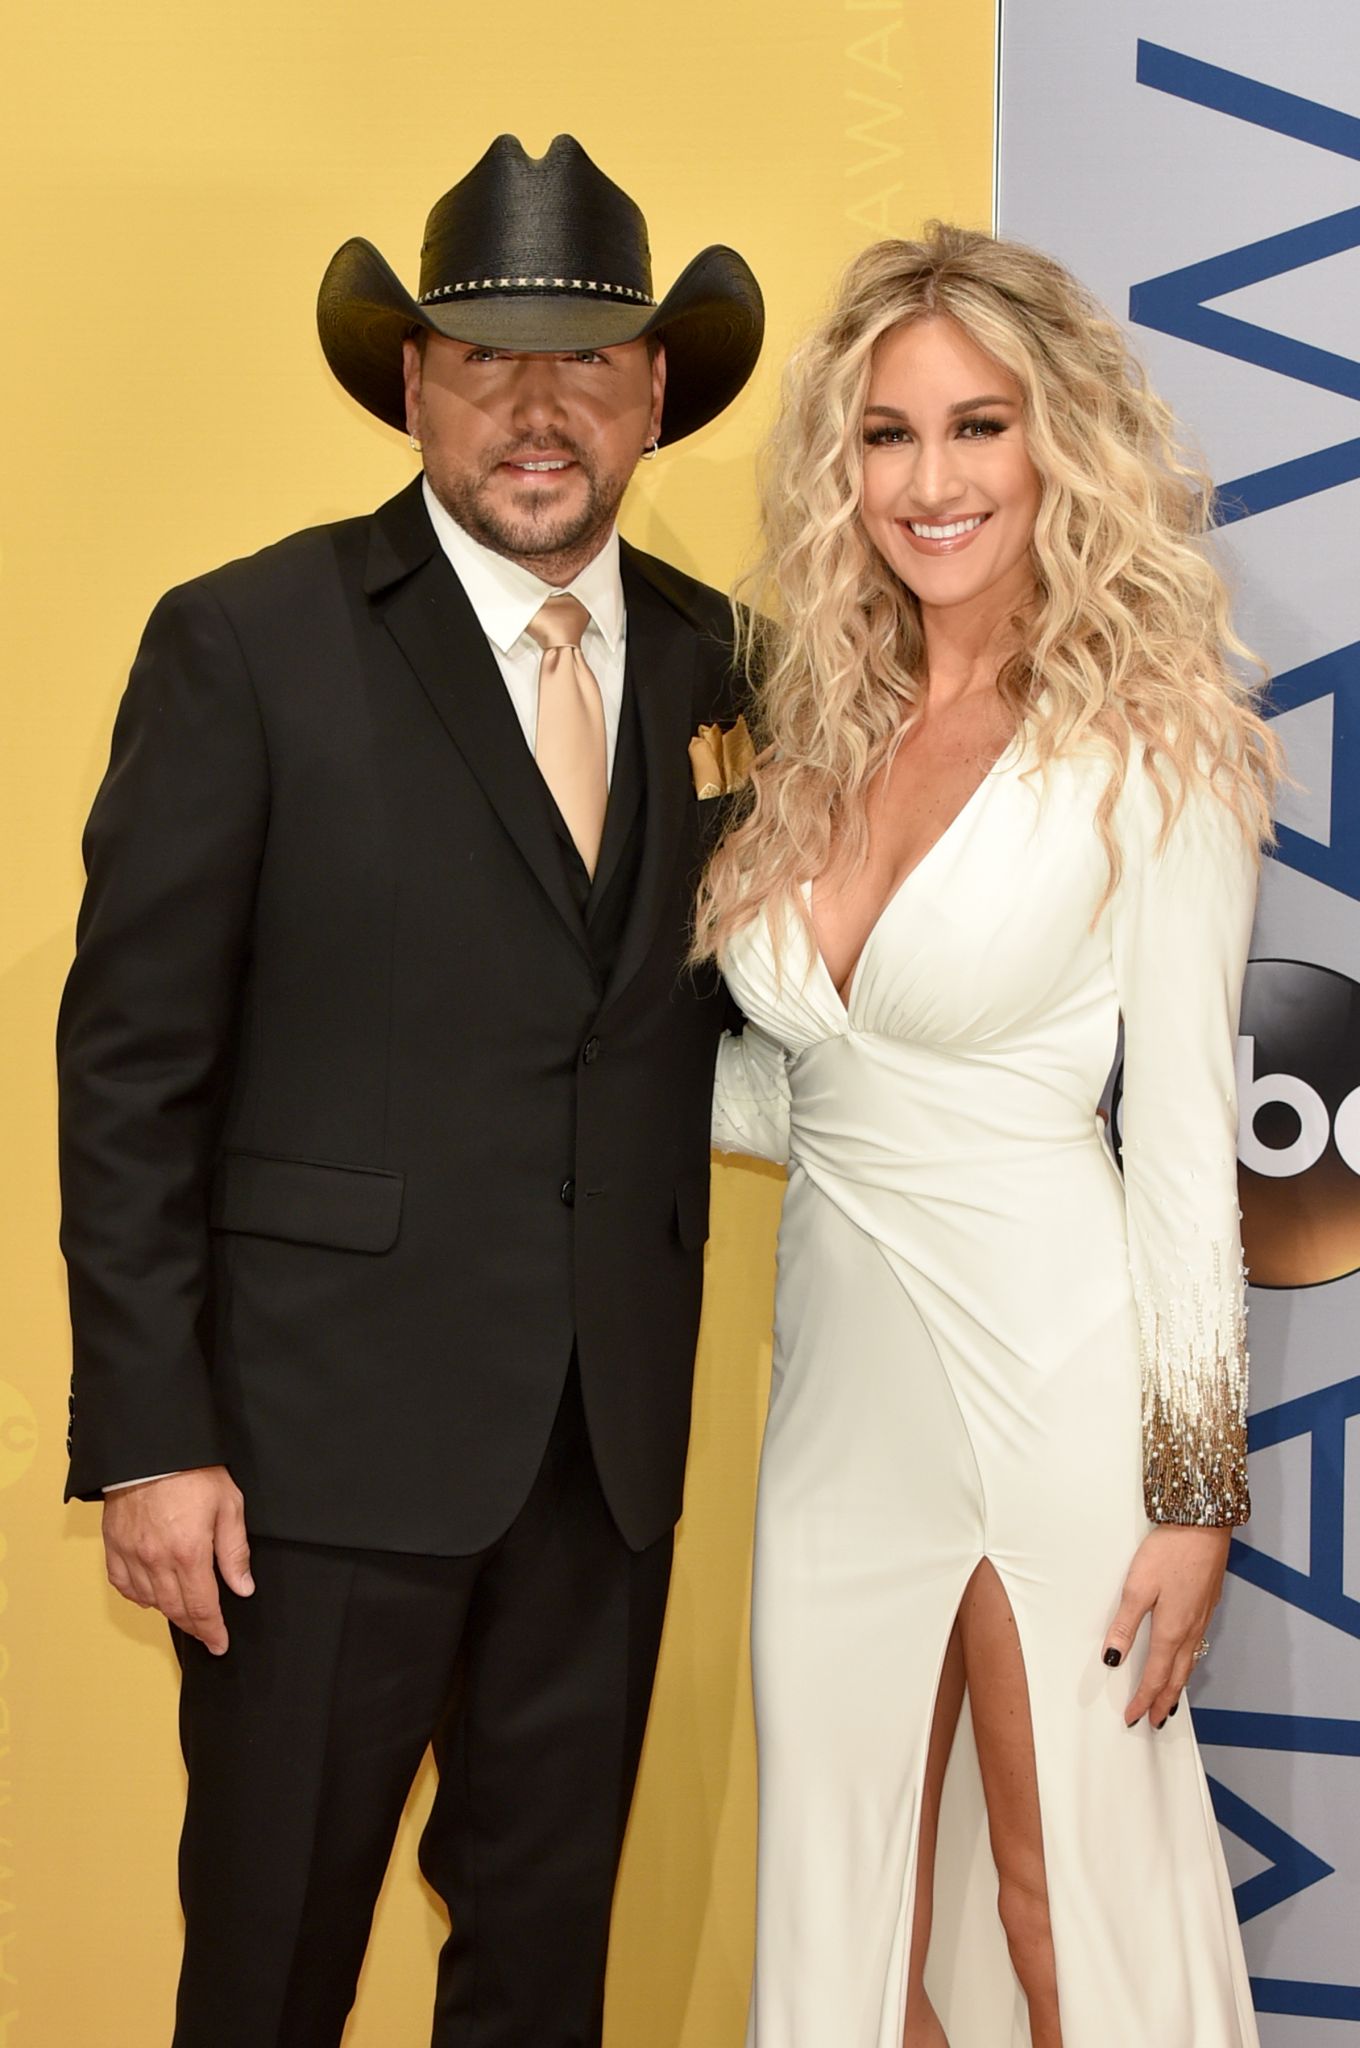 Jason Aldean and Brittany Kerr reveal their baby's gender - Houston ... - Chron.com